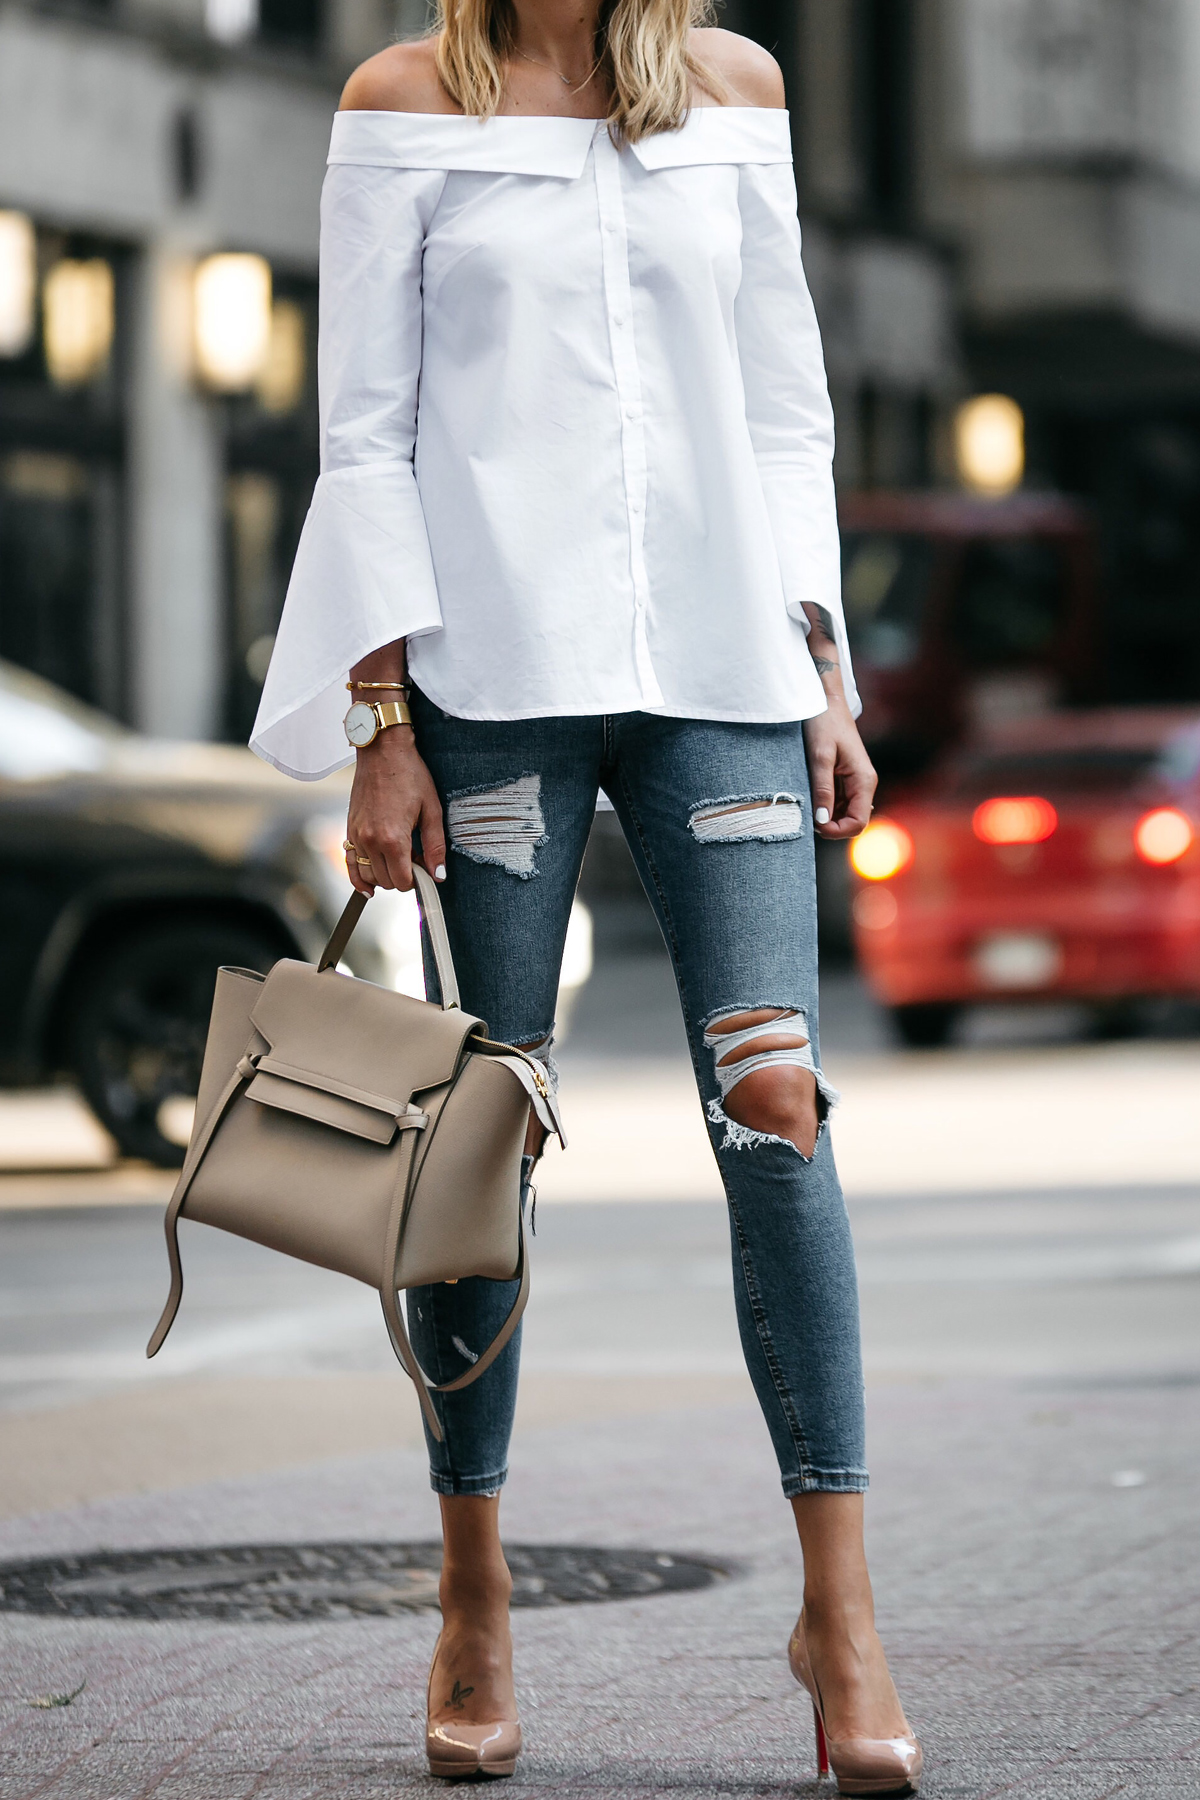 Nordstrom Anniversary Sale White Bell-Sleeve off-the-shoulder Top Topshop Denim Ripped Skinny Jeans Outfit Christian Louboutin Nude Pumps Celine Belt Bag Fashion Jackson Dallas Blogger Fashion Blogger Street Style